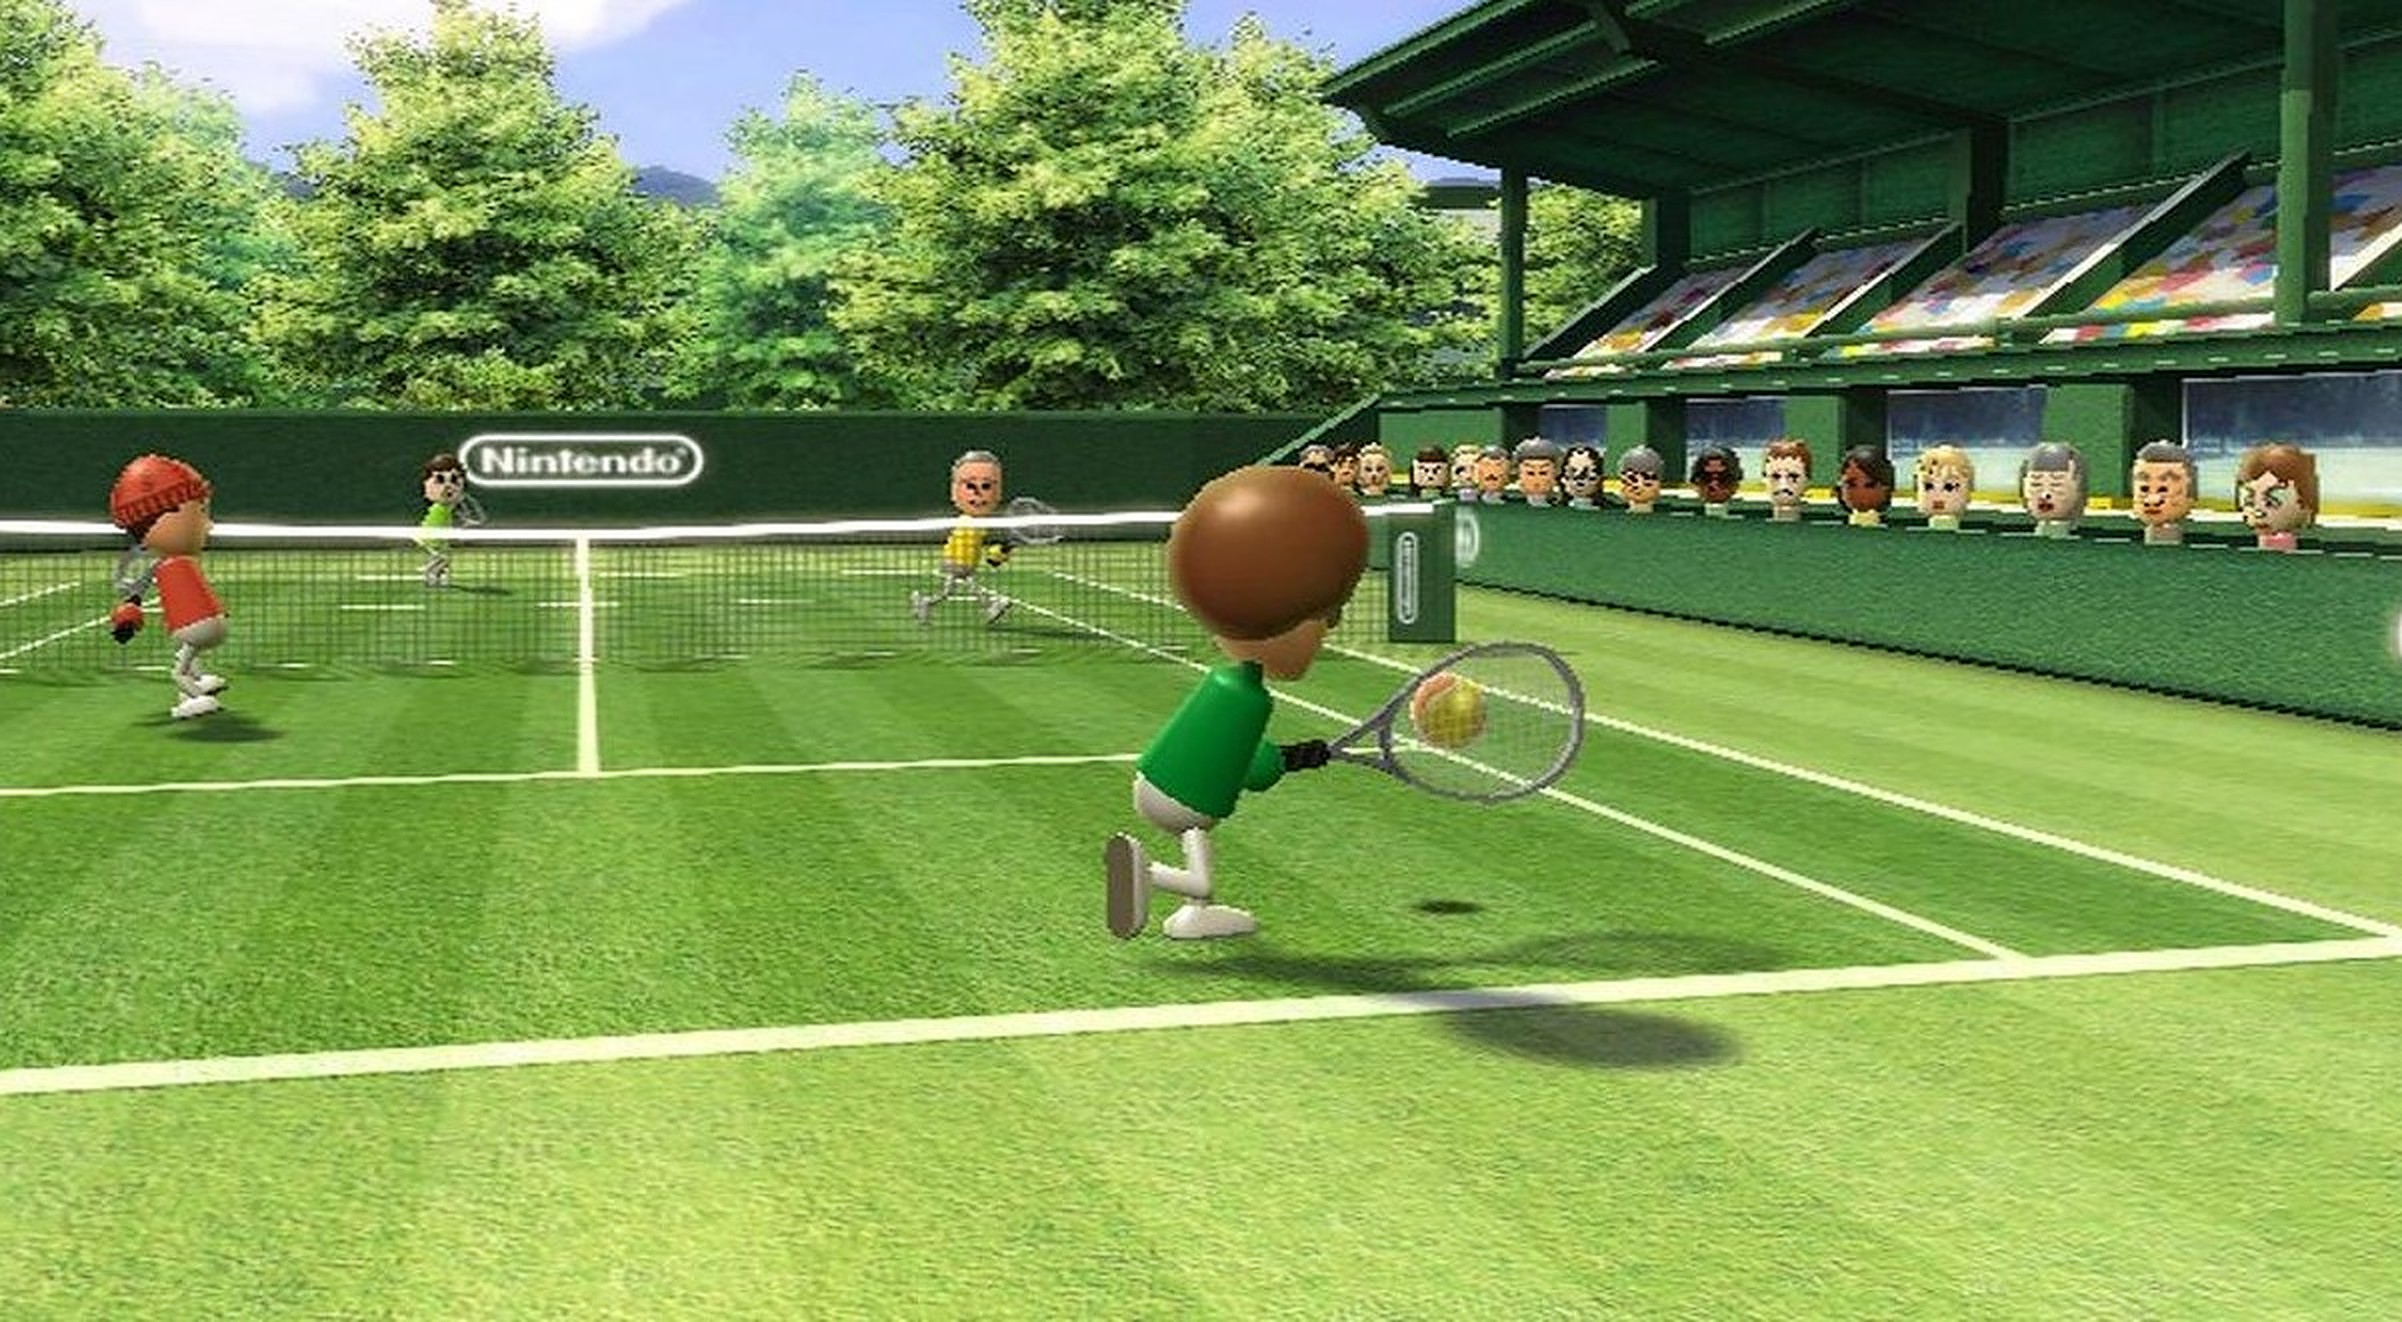 Wii Sports' is Nintendo's All Time Best-Selling Video Game - 24/7 Wall St.